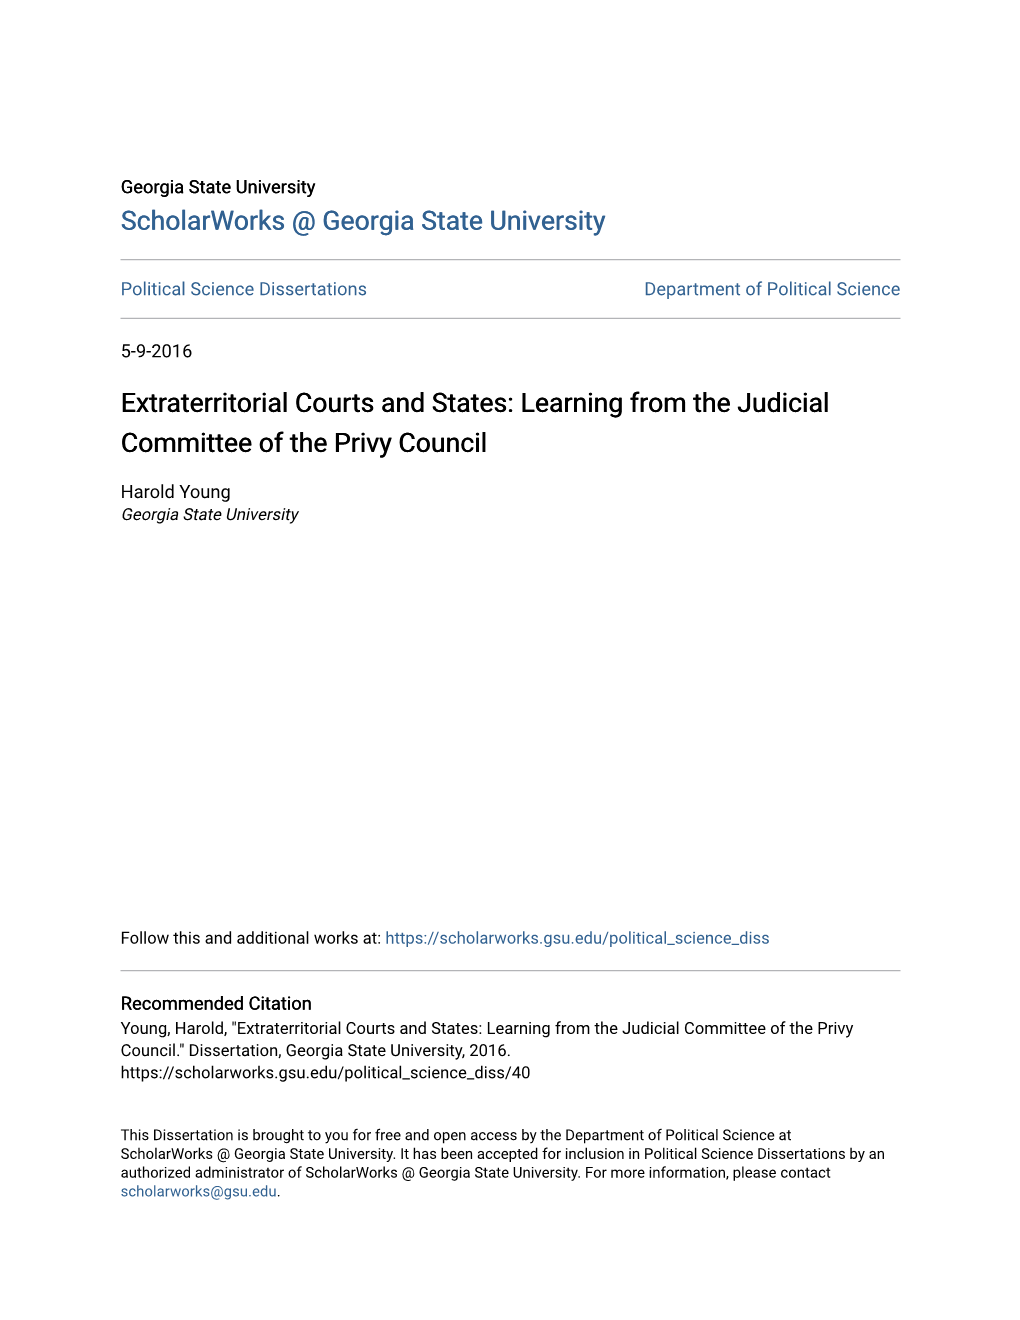 Learning from the Judicial Committee of the Privy Council